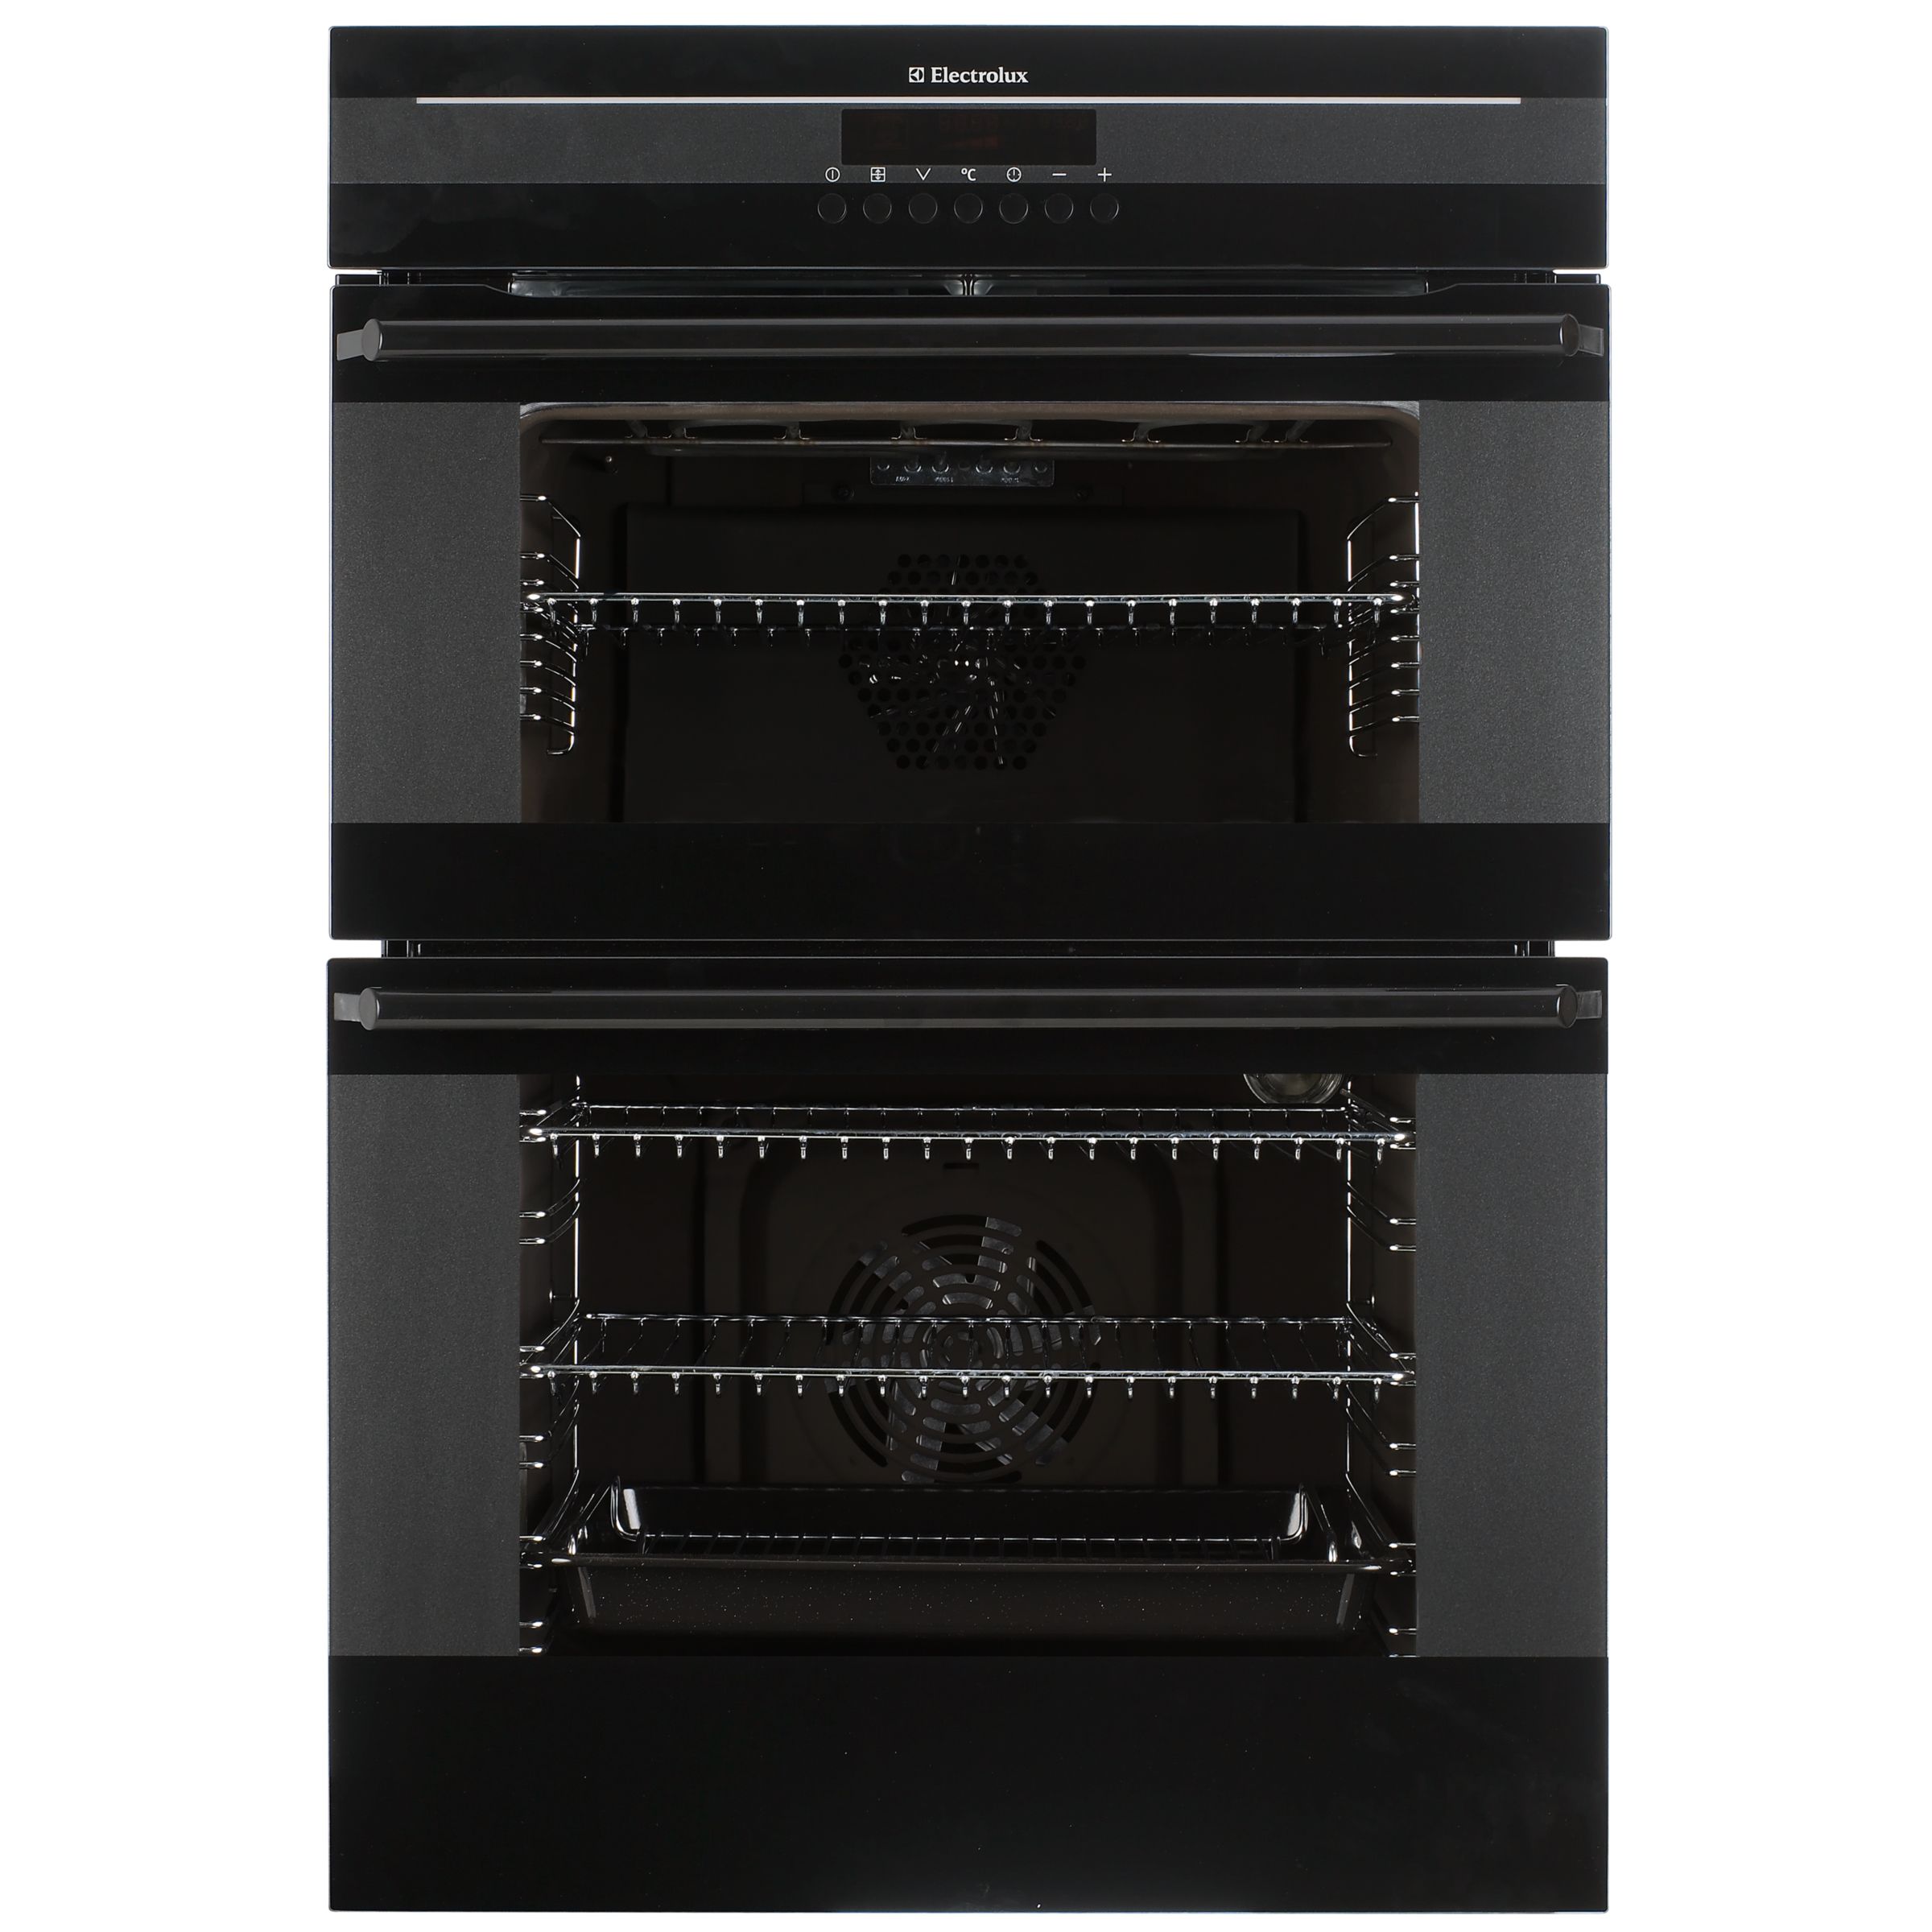 Electrolux EOD67043K Double Electric Oven, Black at John Lewis